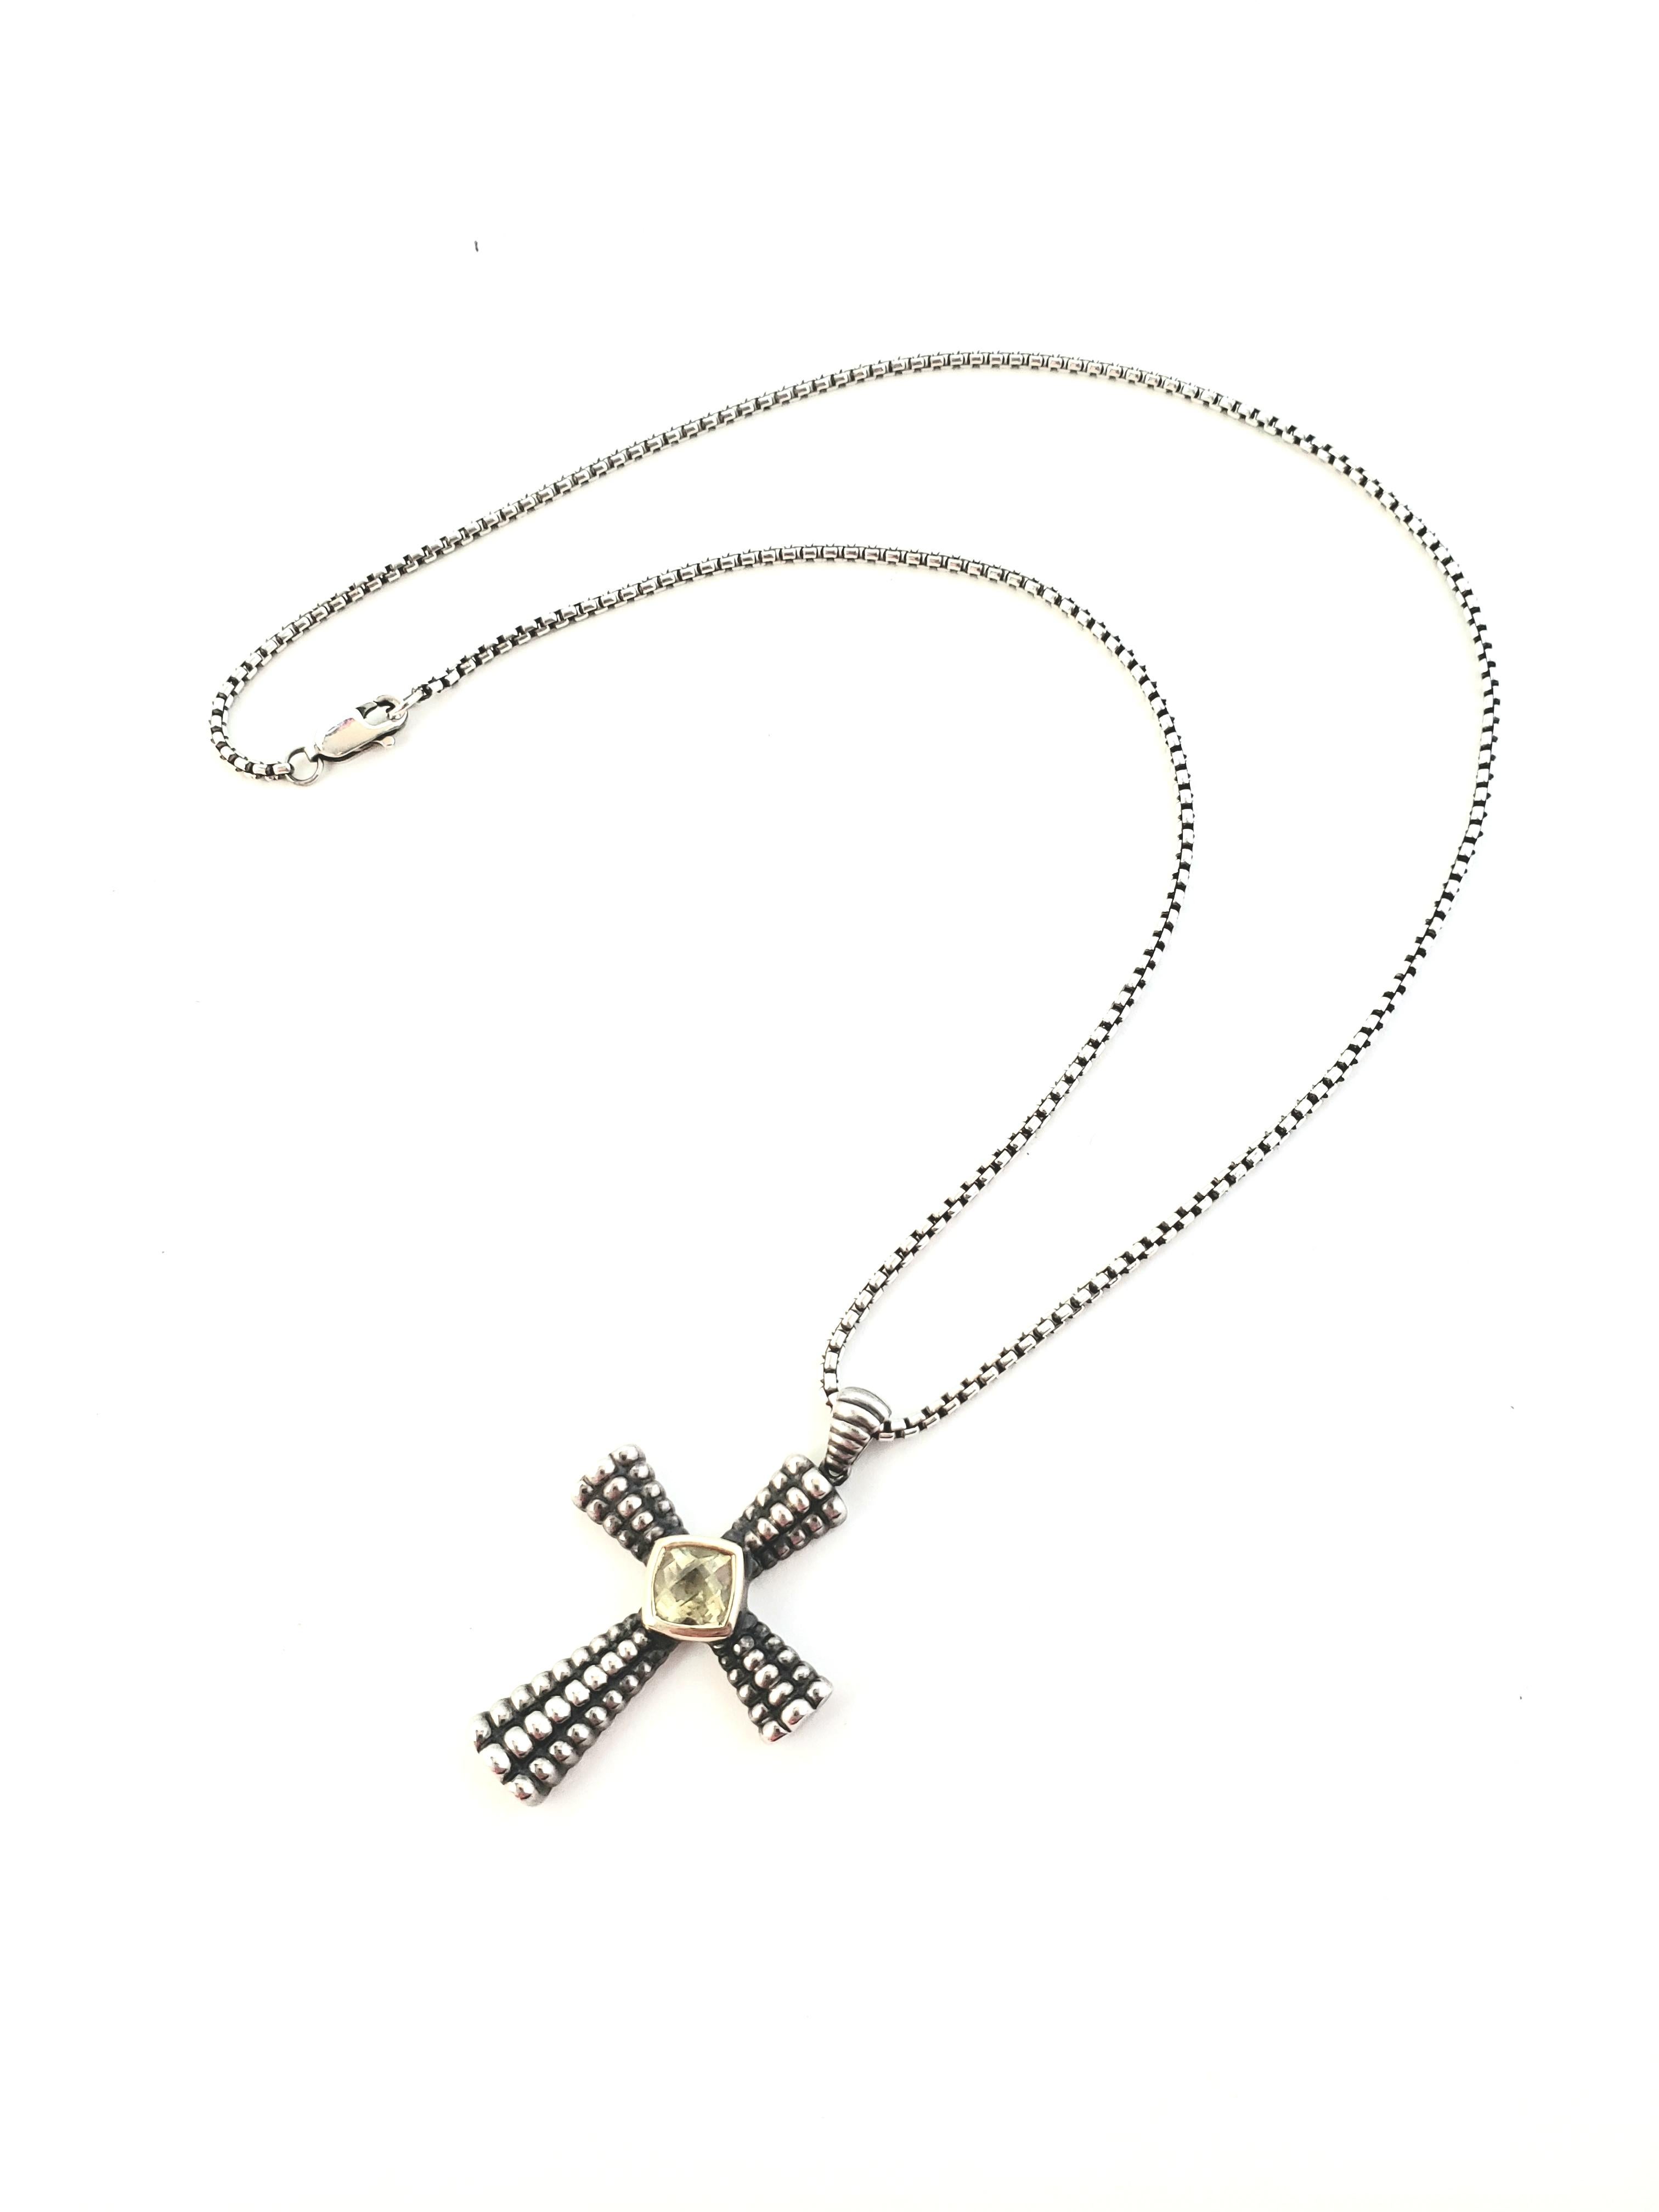 Sterling Silver 14K Citrine Oxidized Cross Pendant Necklace

This is a lovely sterling silver and 14K Citrine Oxidized Cross Pendant Necklace. 

Measurements:     Chain measures 16